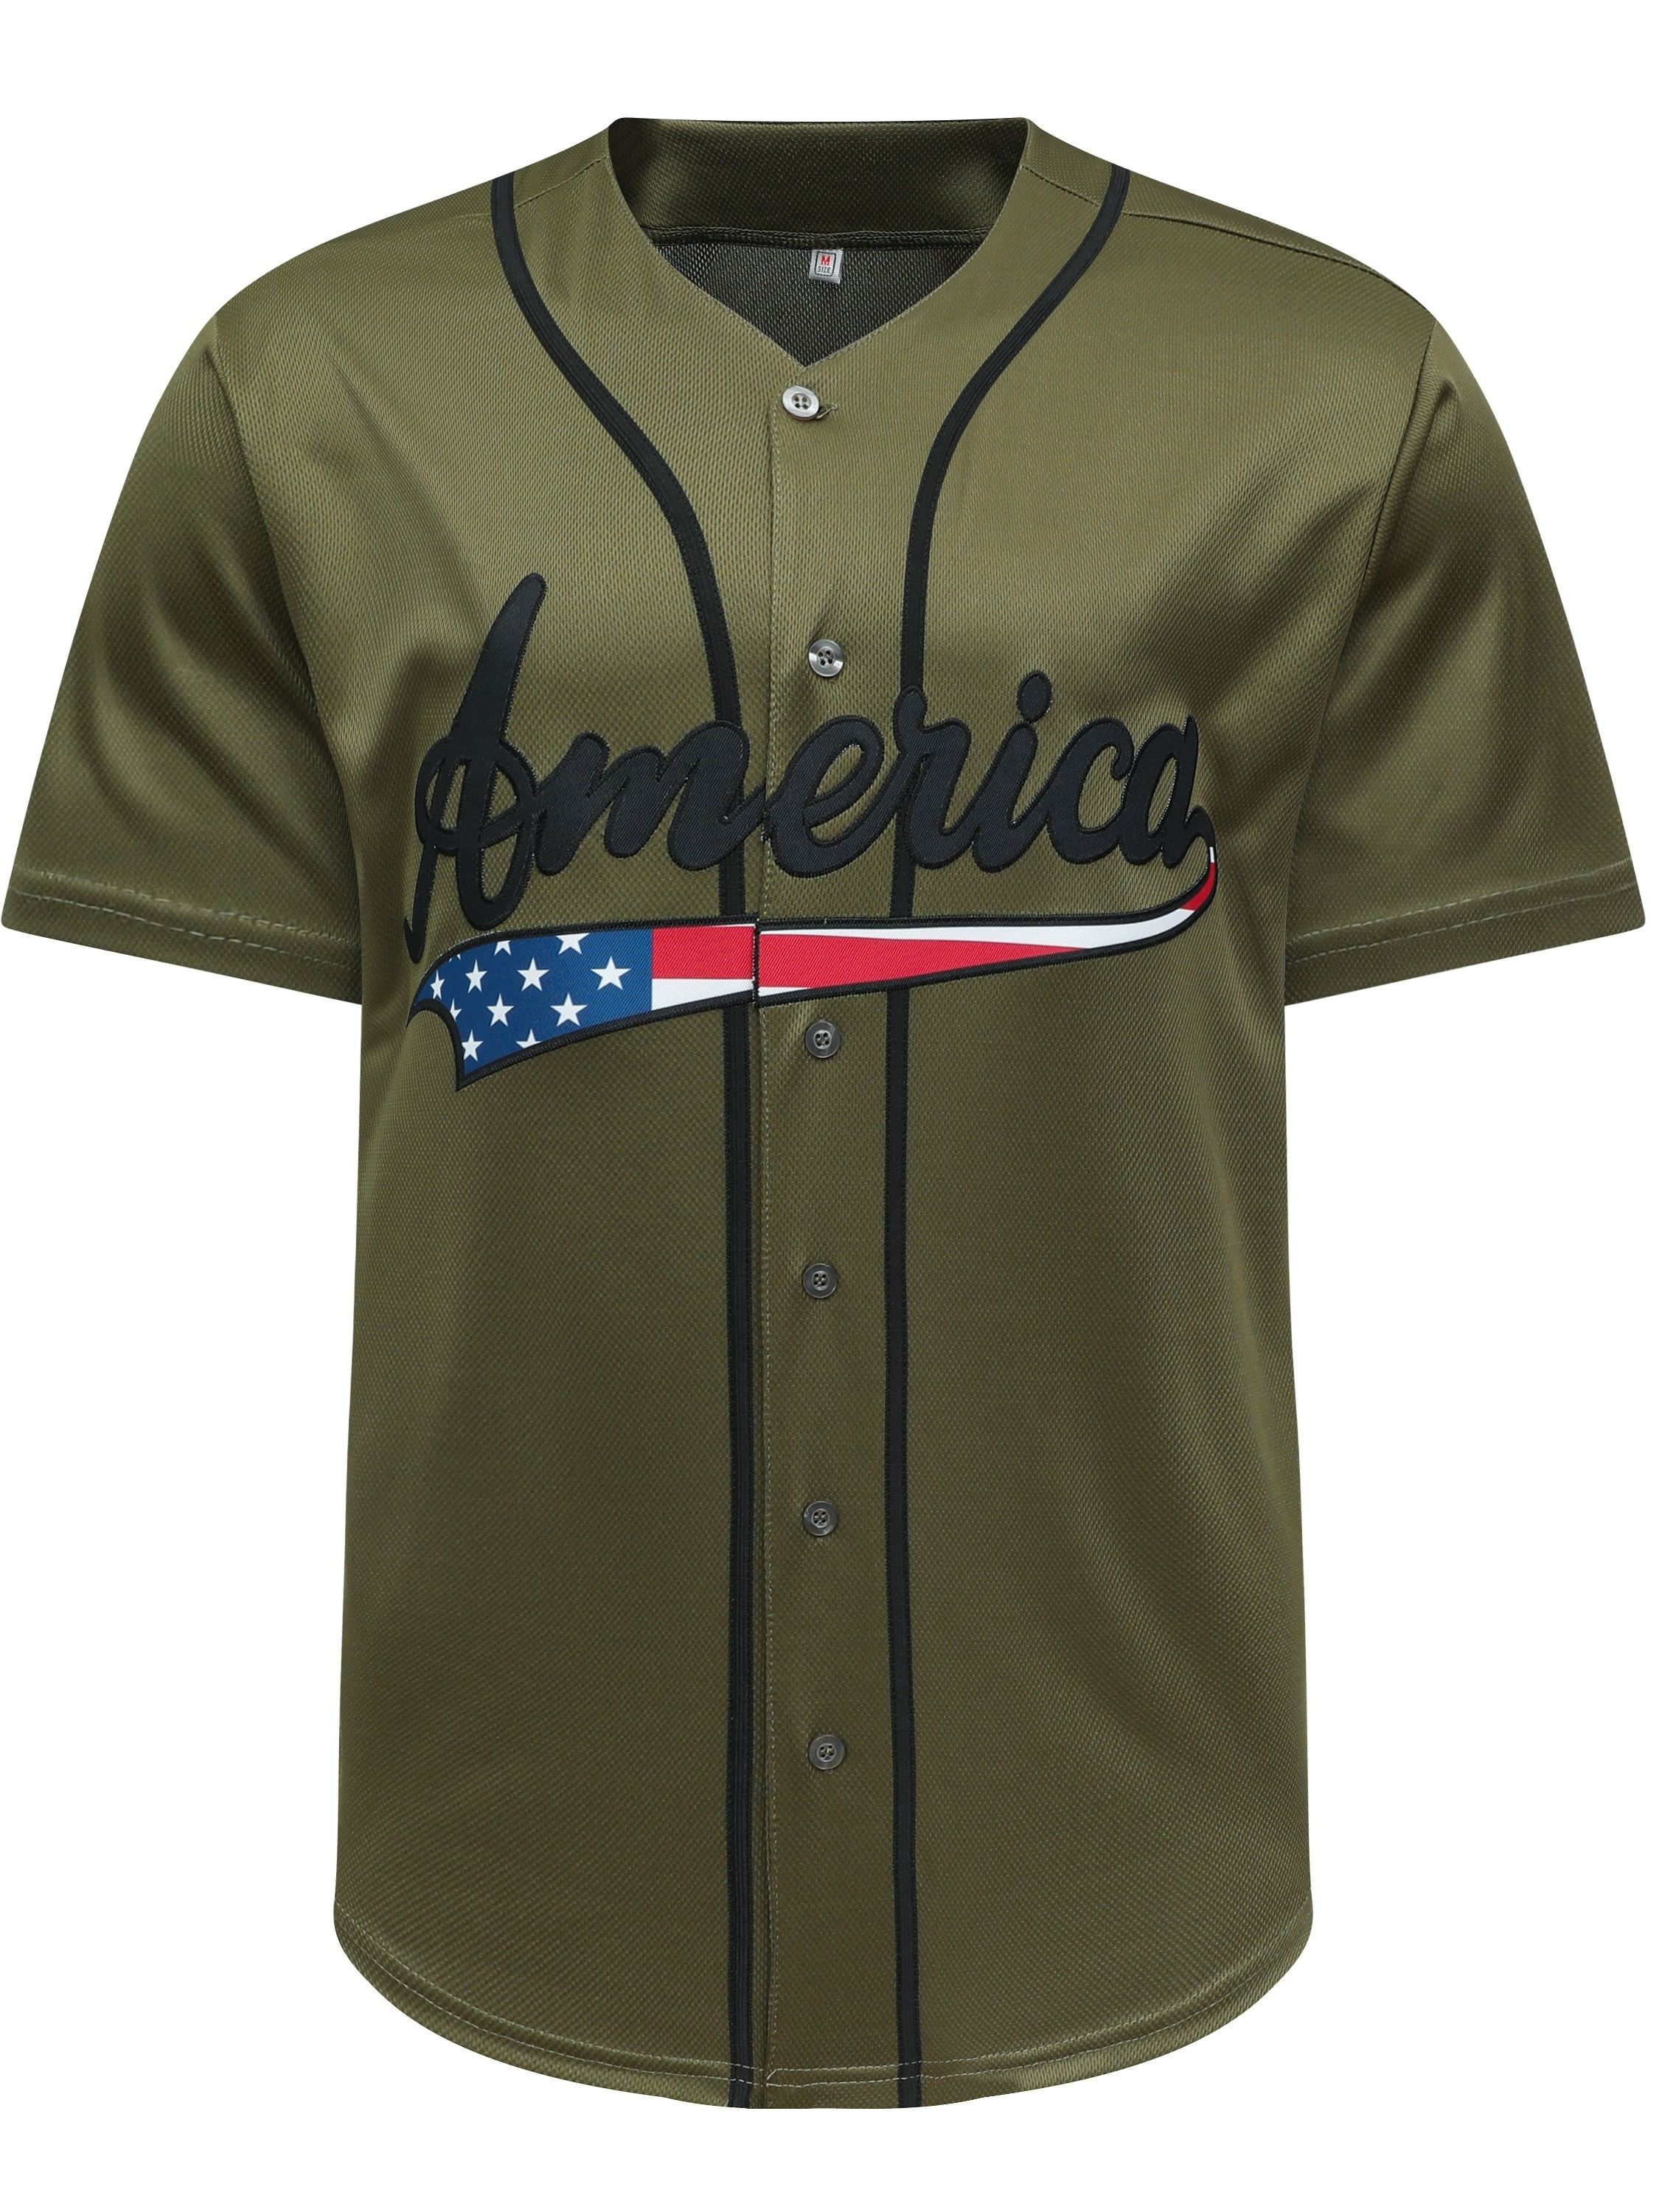 Men's Embroidery Baseball Jersey, #1 Retro Salute Olive Green Classics  Design Button Up Short Sleeve Breathable Baseball Shirt For Training